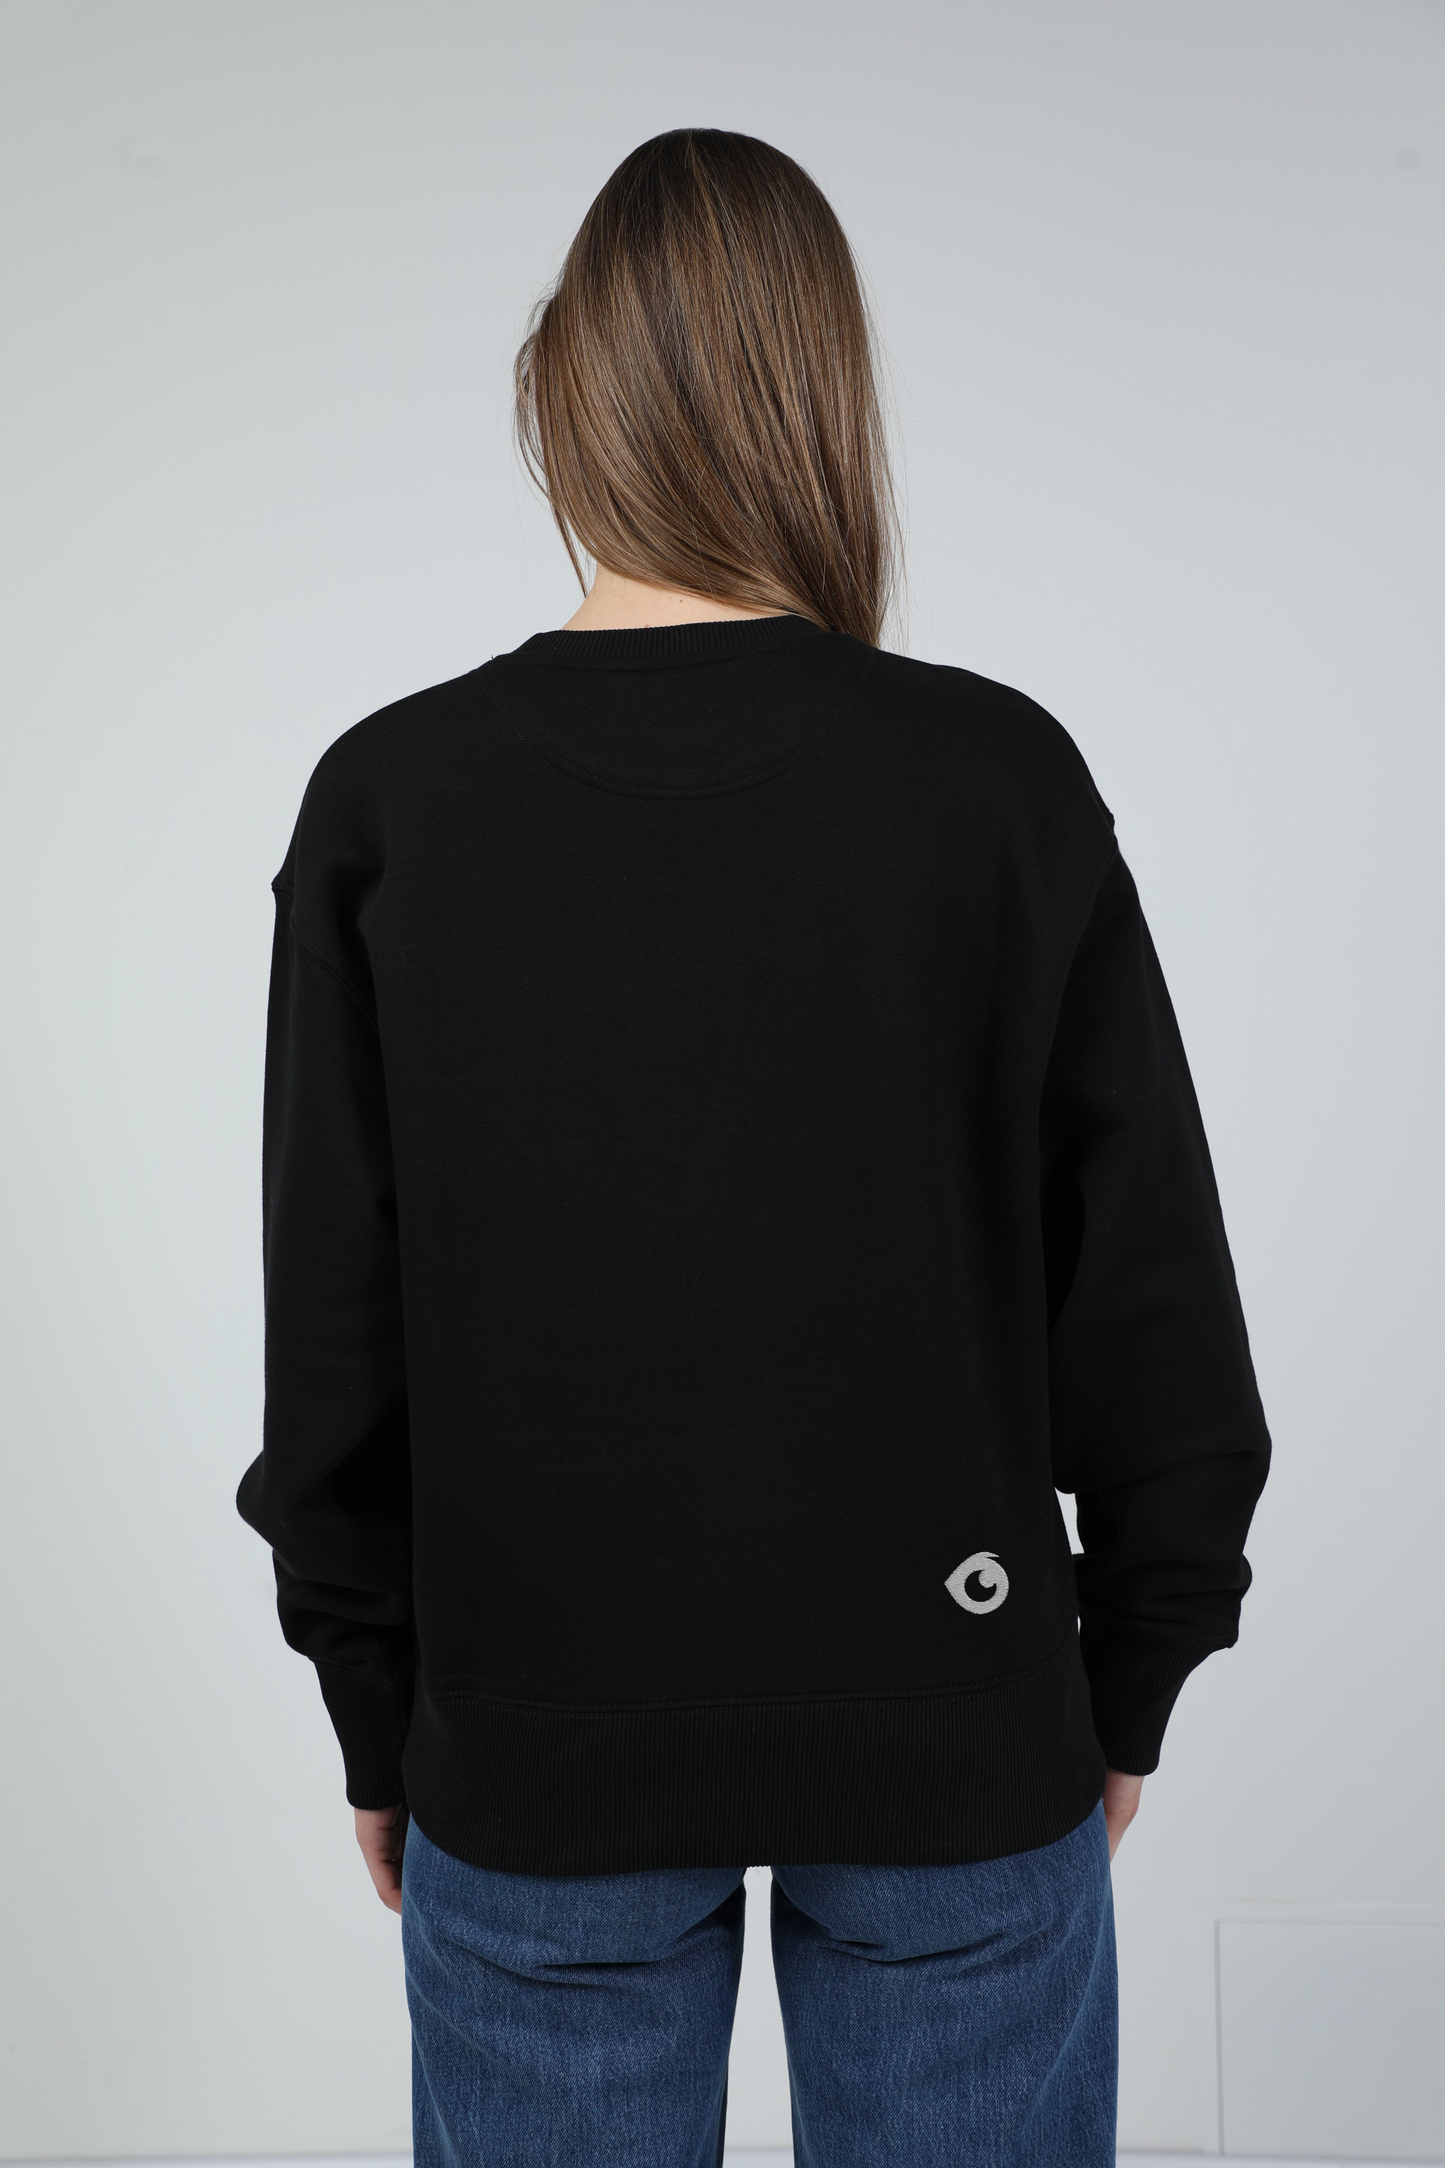 Comme ci comme ca | Crew neck sweatshirt with embroidered dog. Oversize fit | Unisex